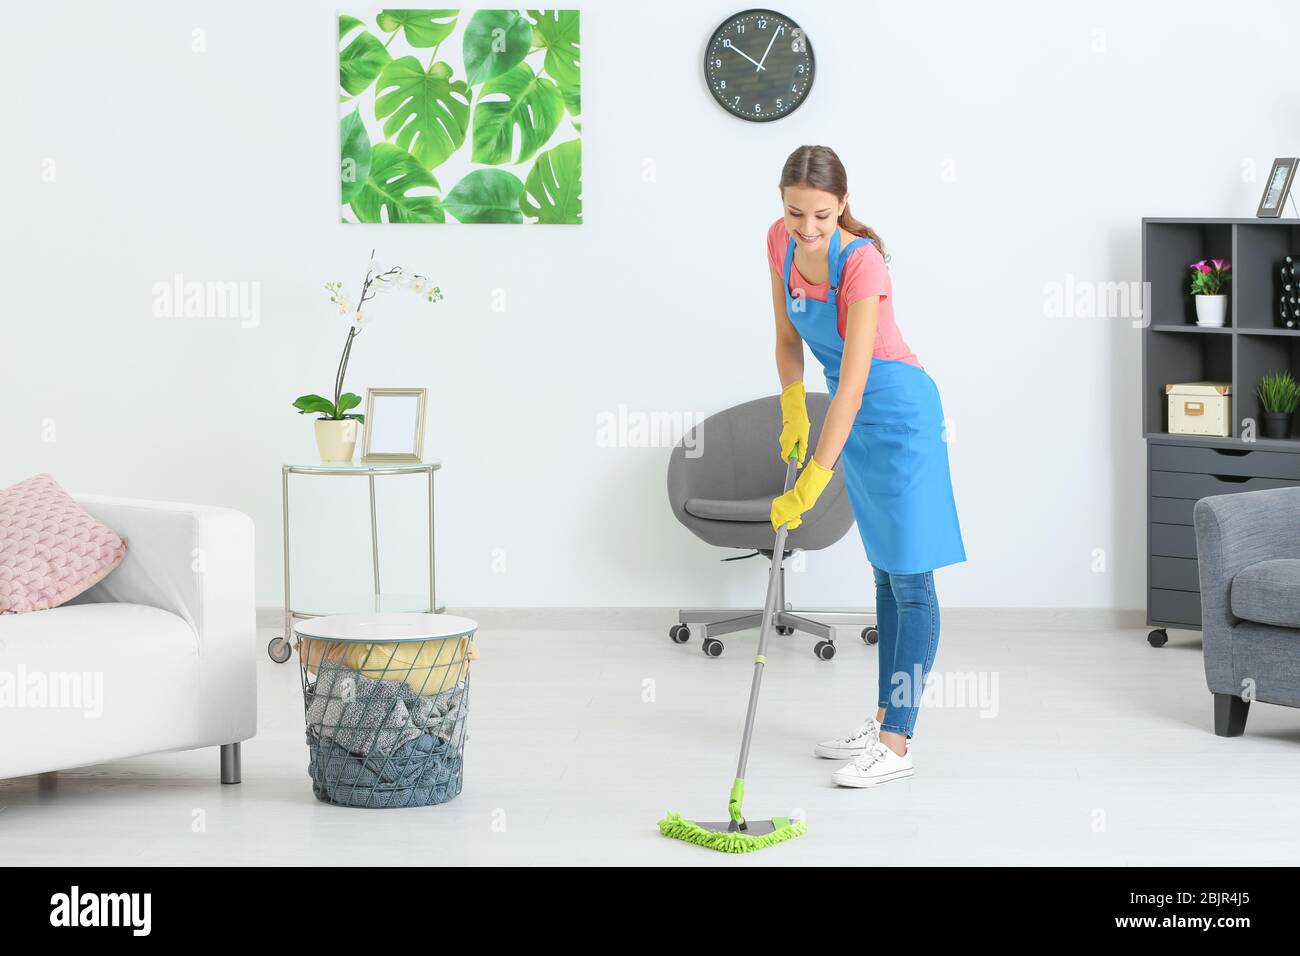 Young woman mopping floor at home Stock Photo